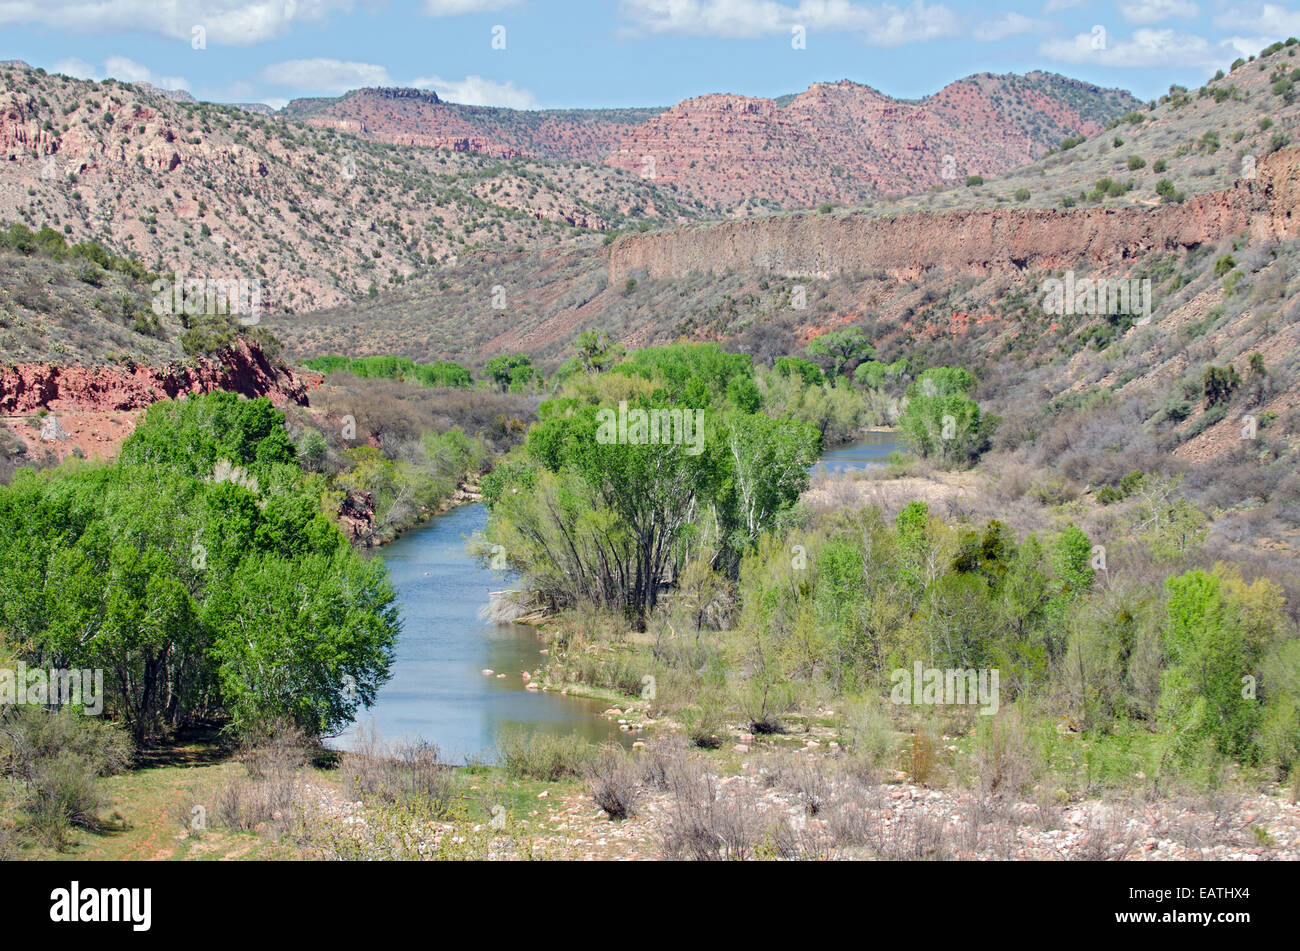 Cottonwood trees growing along the Verde River near Perkinsville. Stock Photo